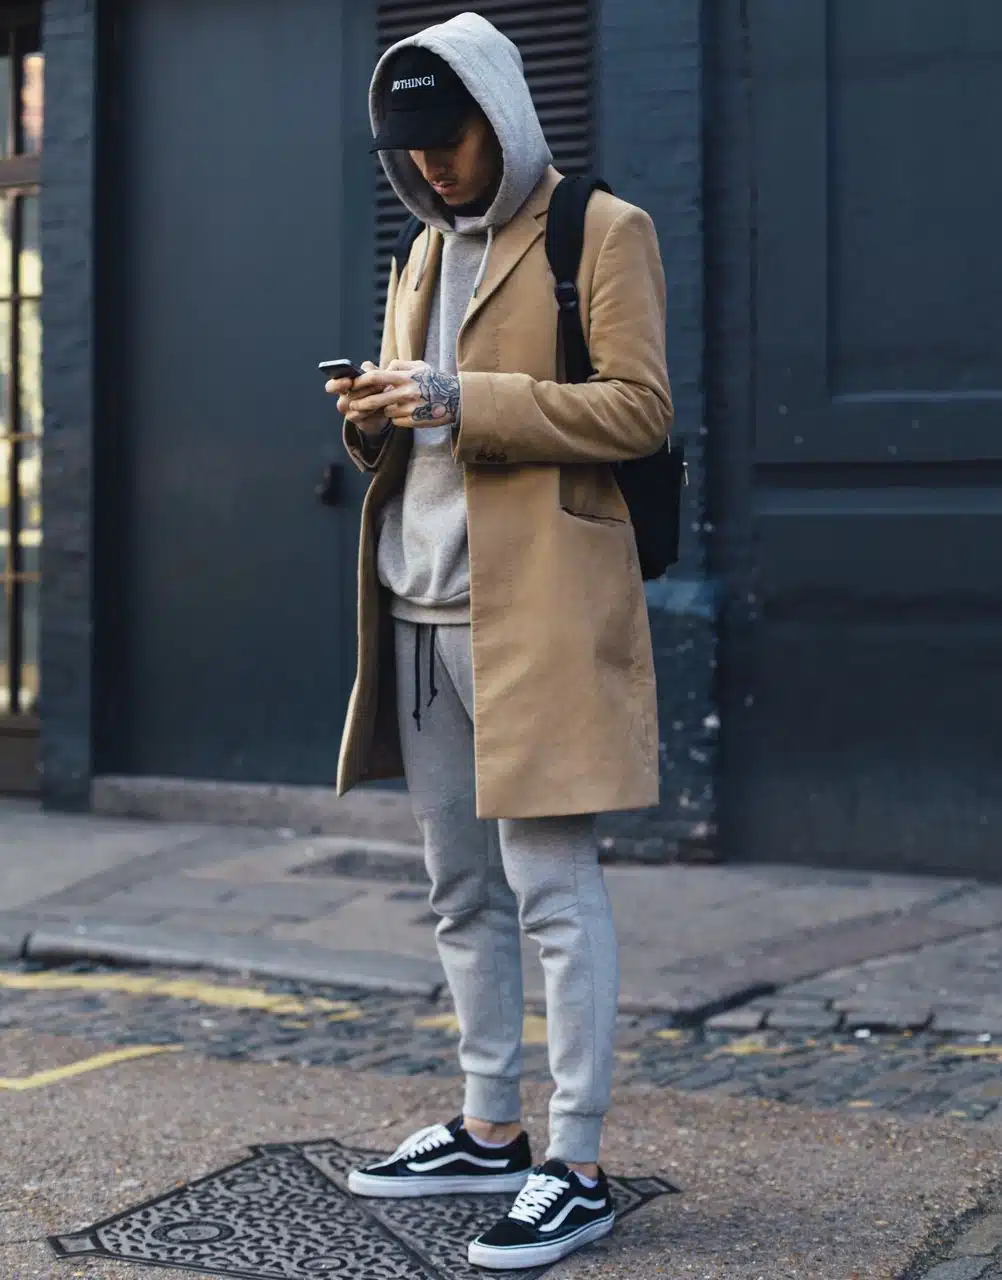 Street Style Guide For Men To Wear Hoodie